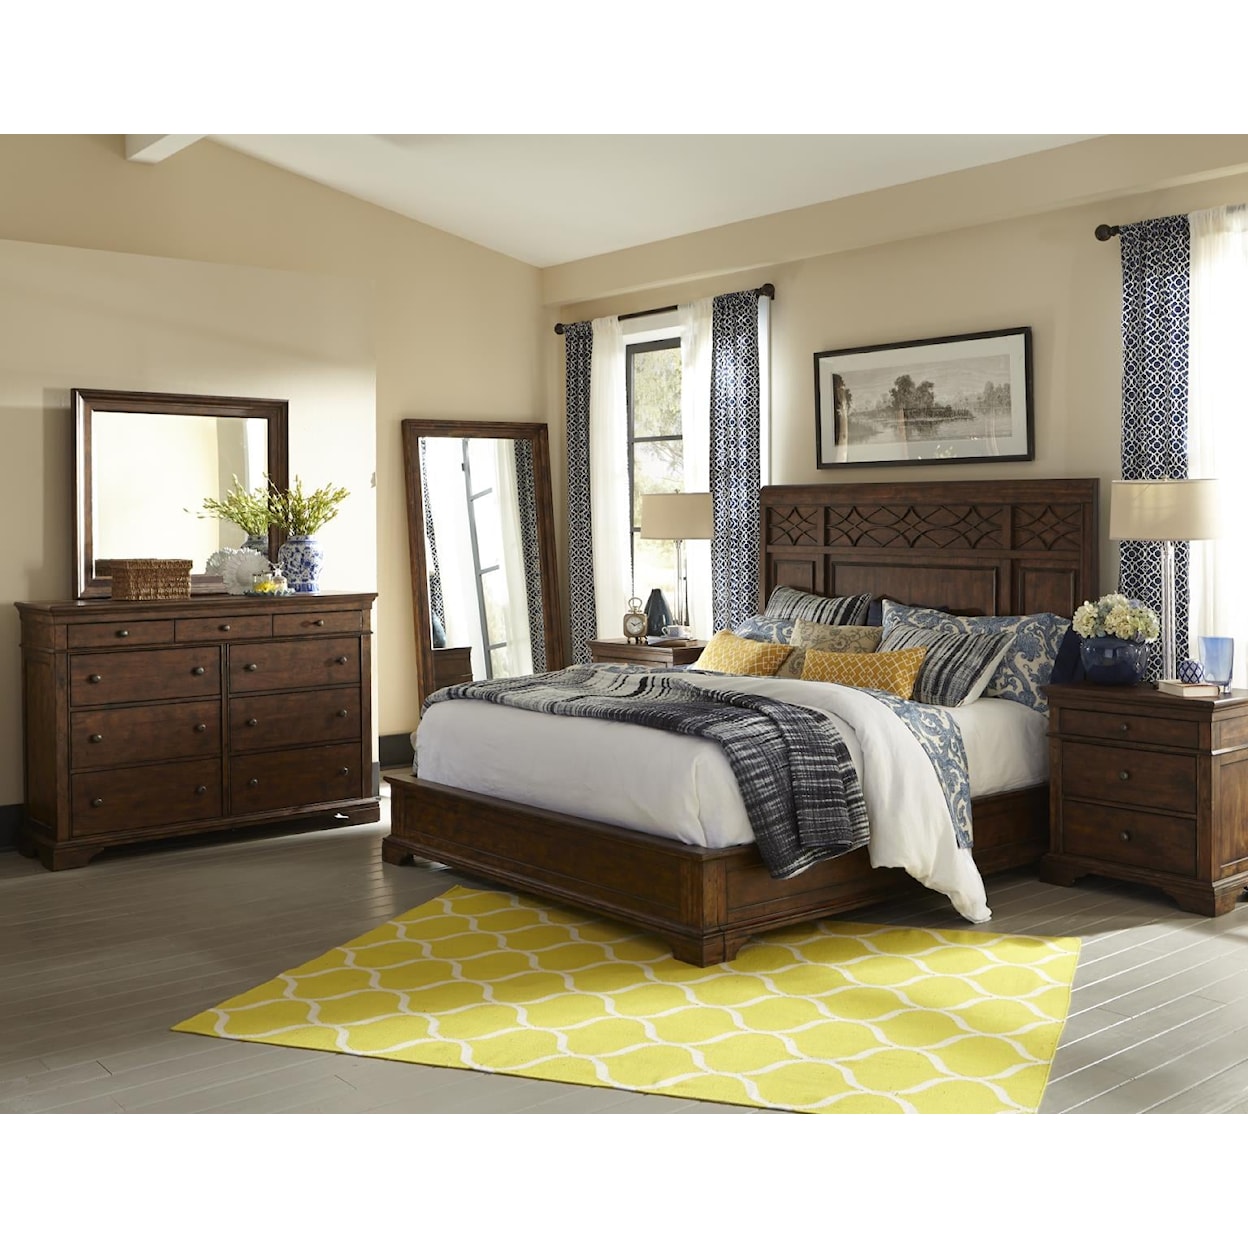 Trisha Yearwood Home Collection by Legacy Classic Trisha Yearwood Home Drawer Chest